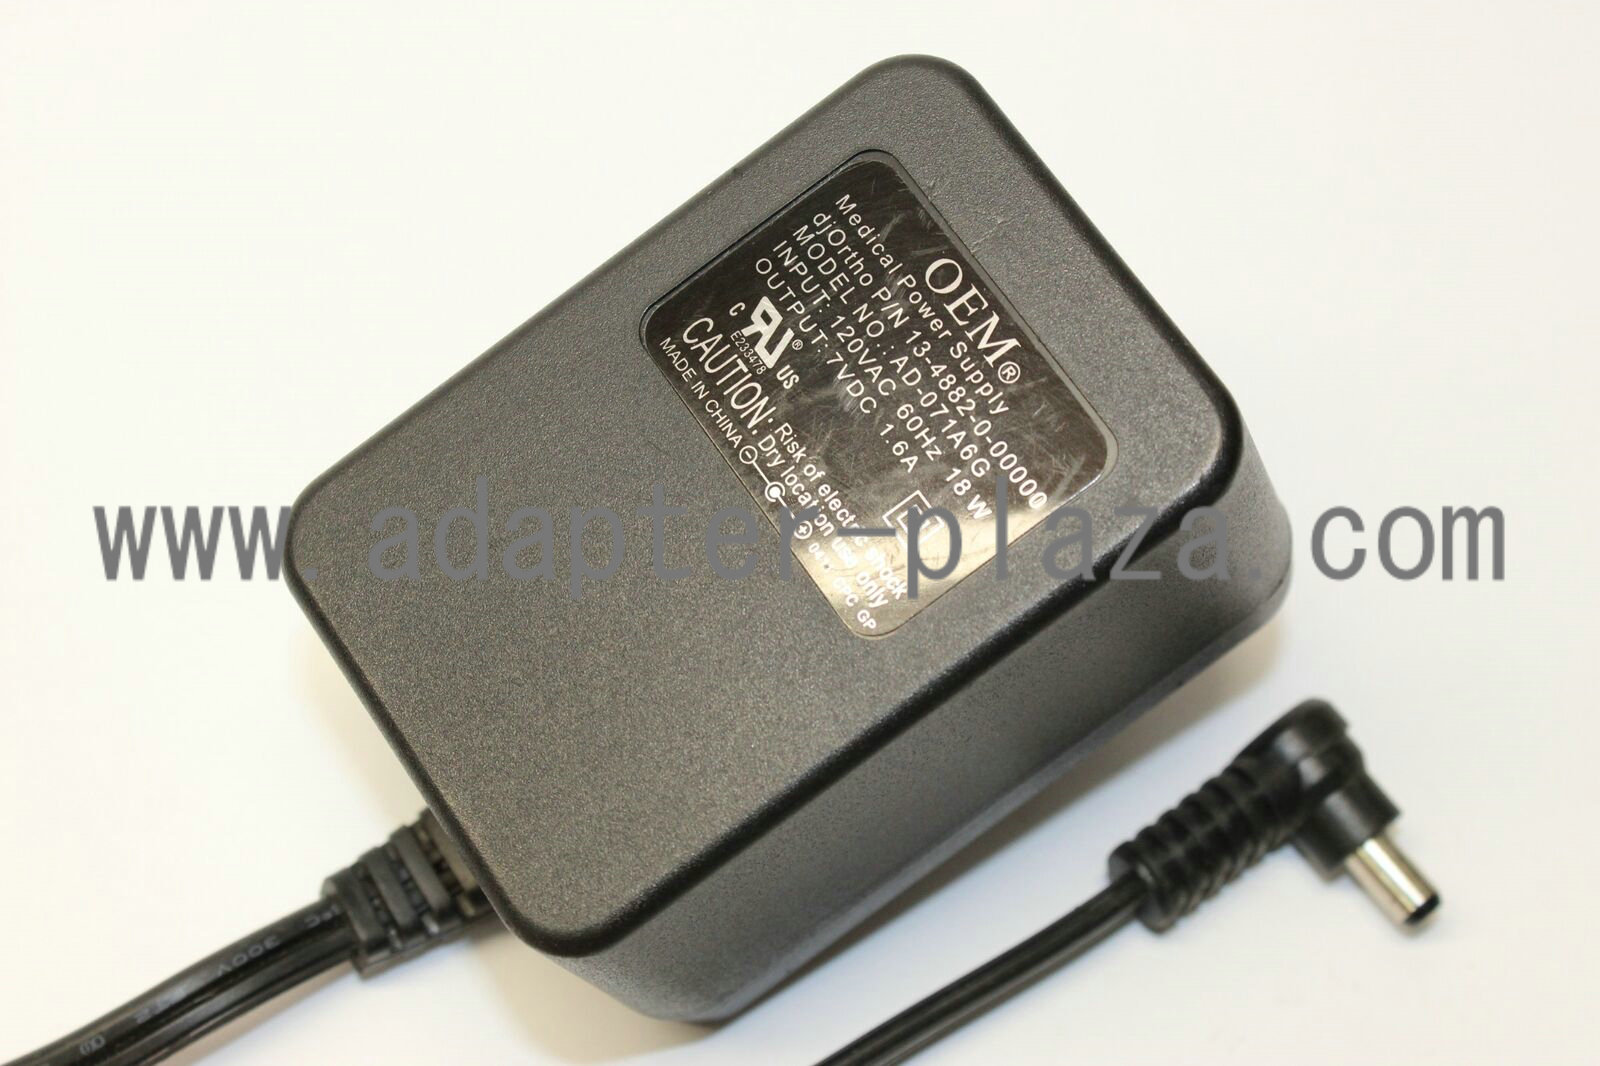 New 13-4882-0-0000 AD-071A6G Medical Power Supply 7VDC 1.6A Transformer Adapter Charger